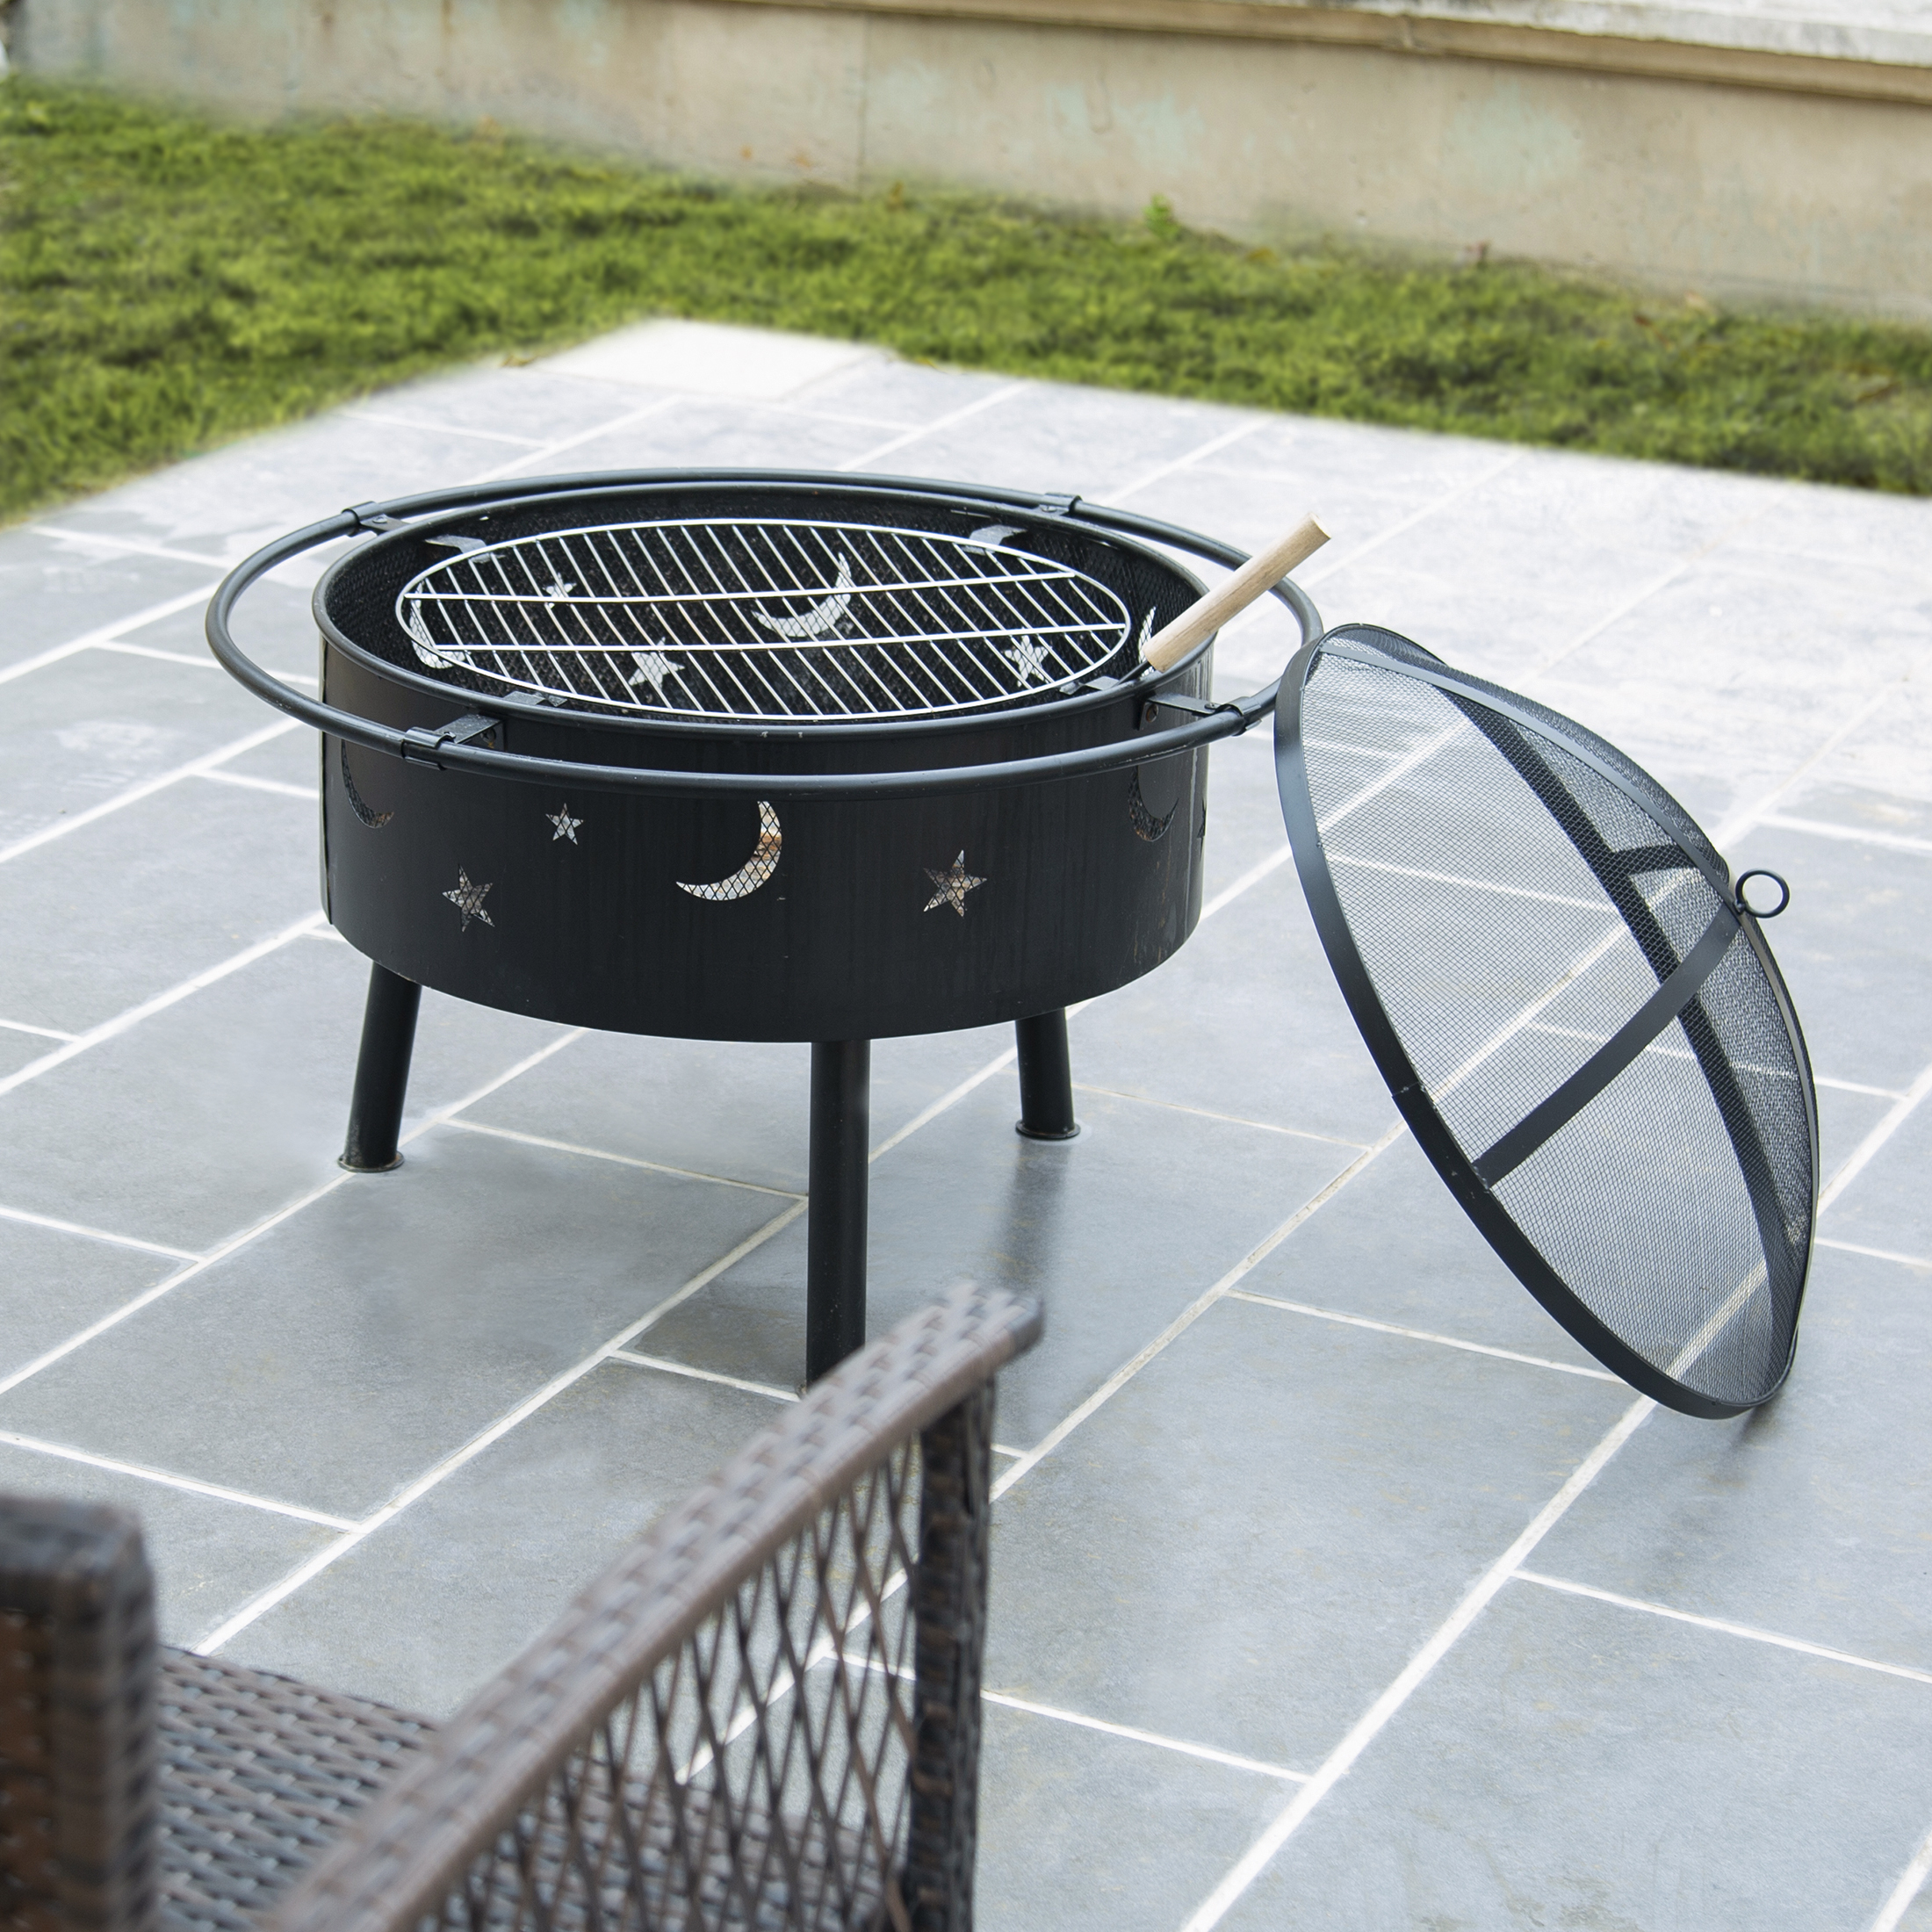 Star and Moon Steel Wood Burning Round Fire Pit - image 3 of 21